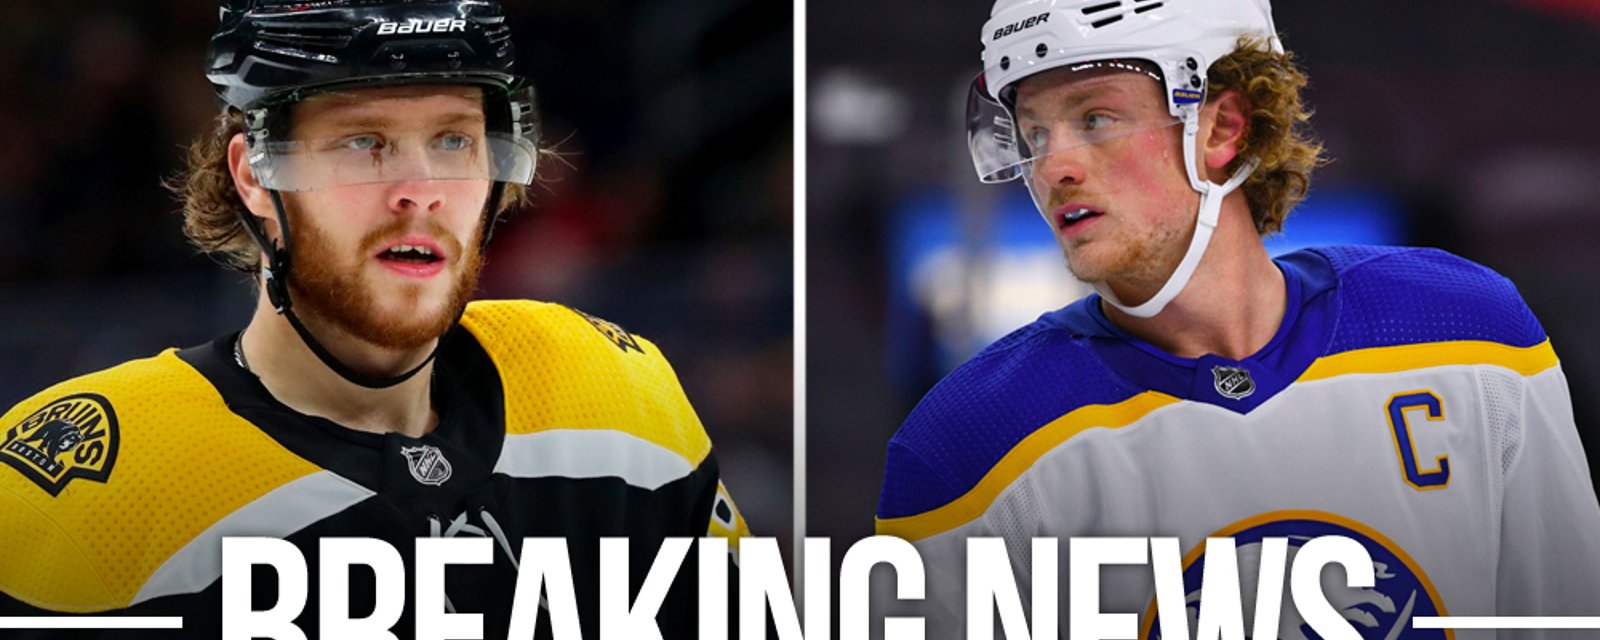 Bruins insiders report on potential cost to land Eichel in blockbuster trade